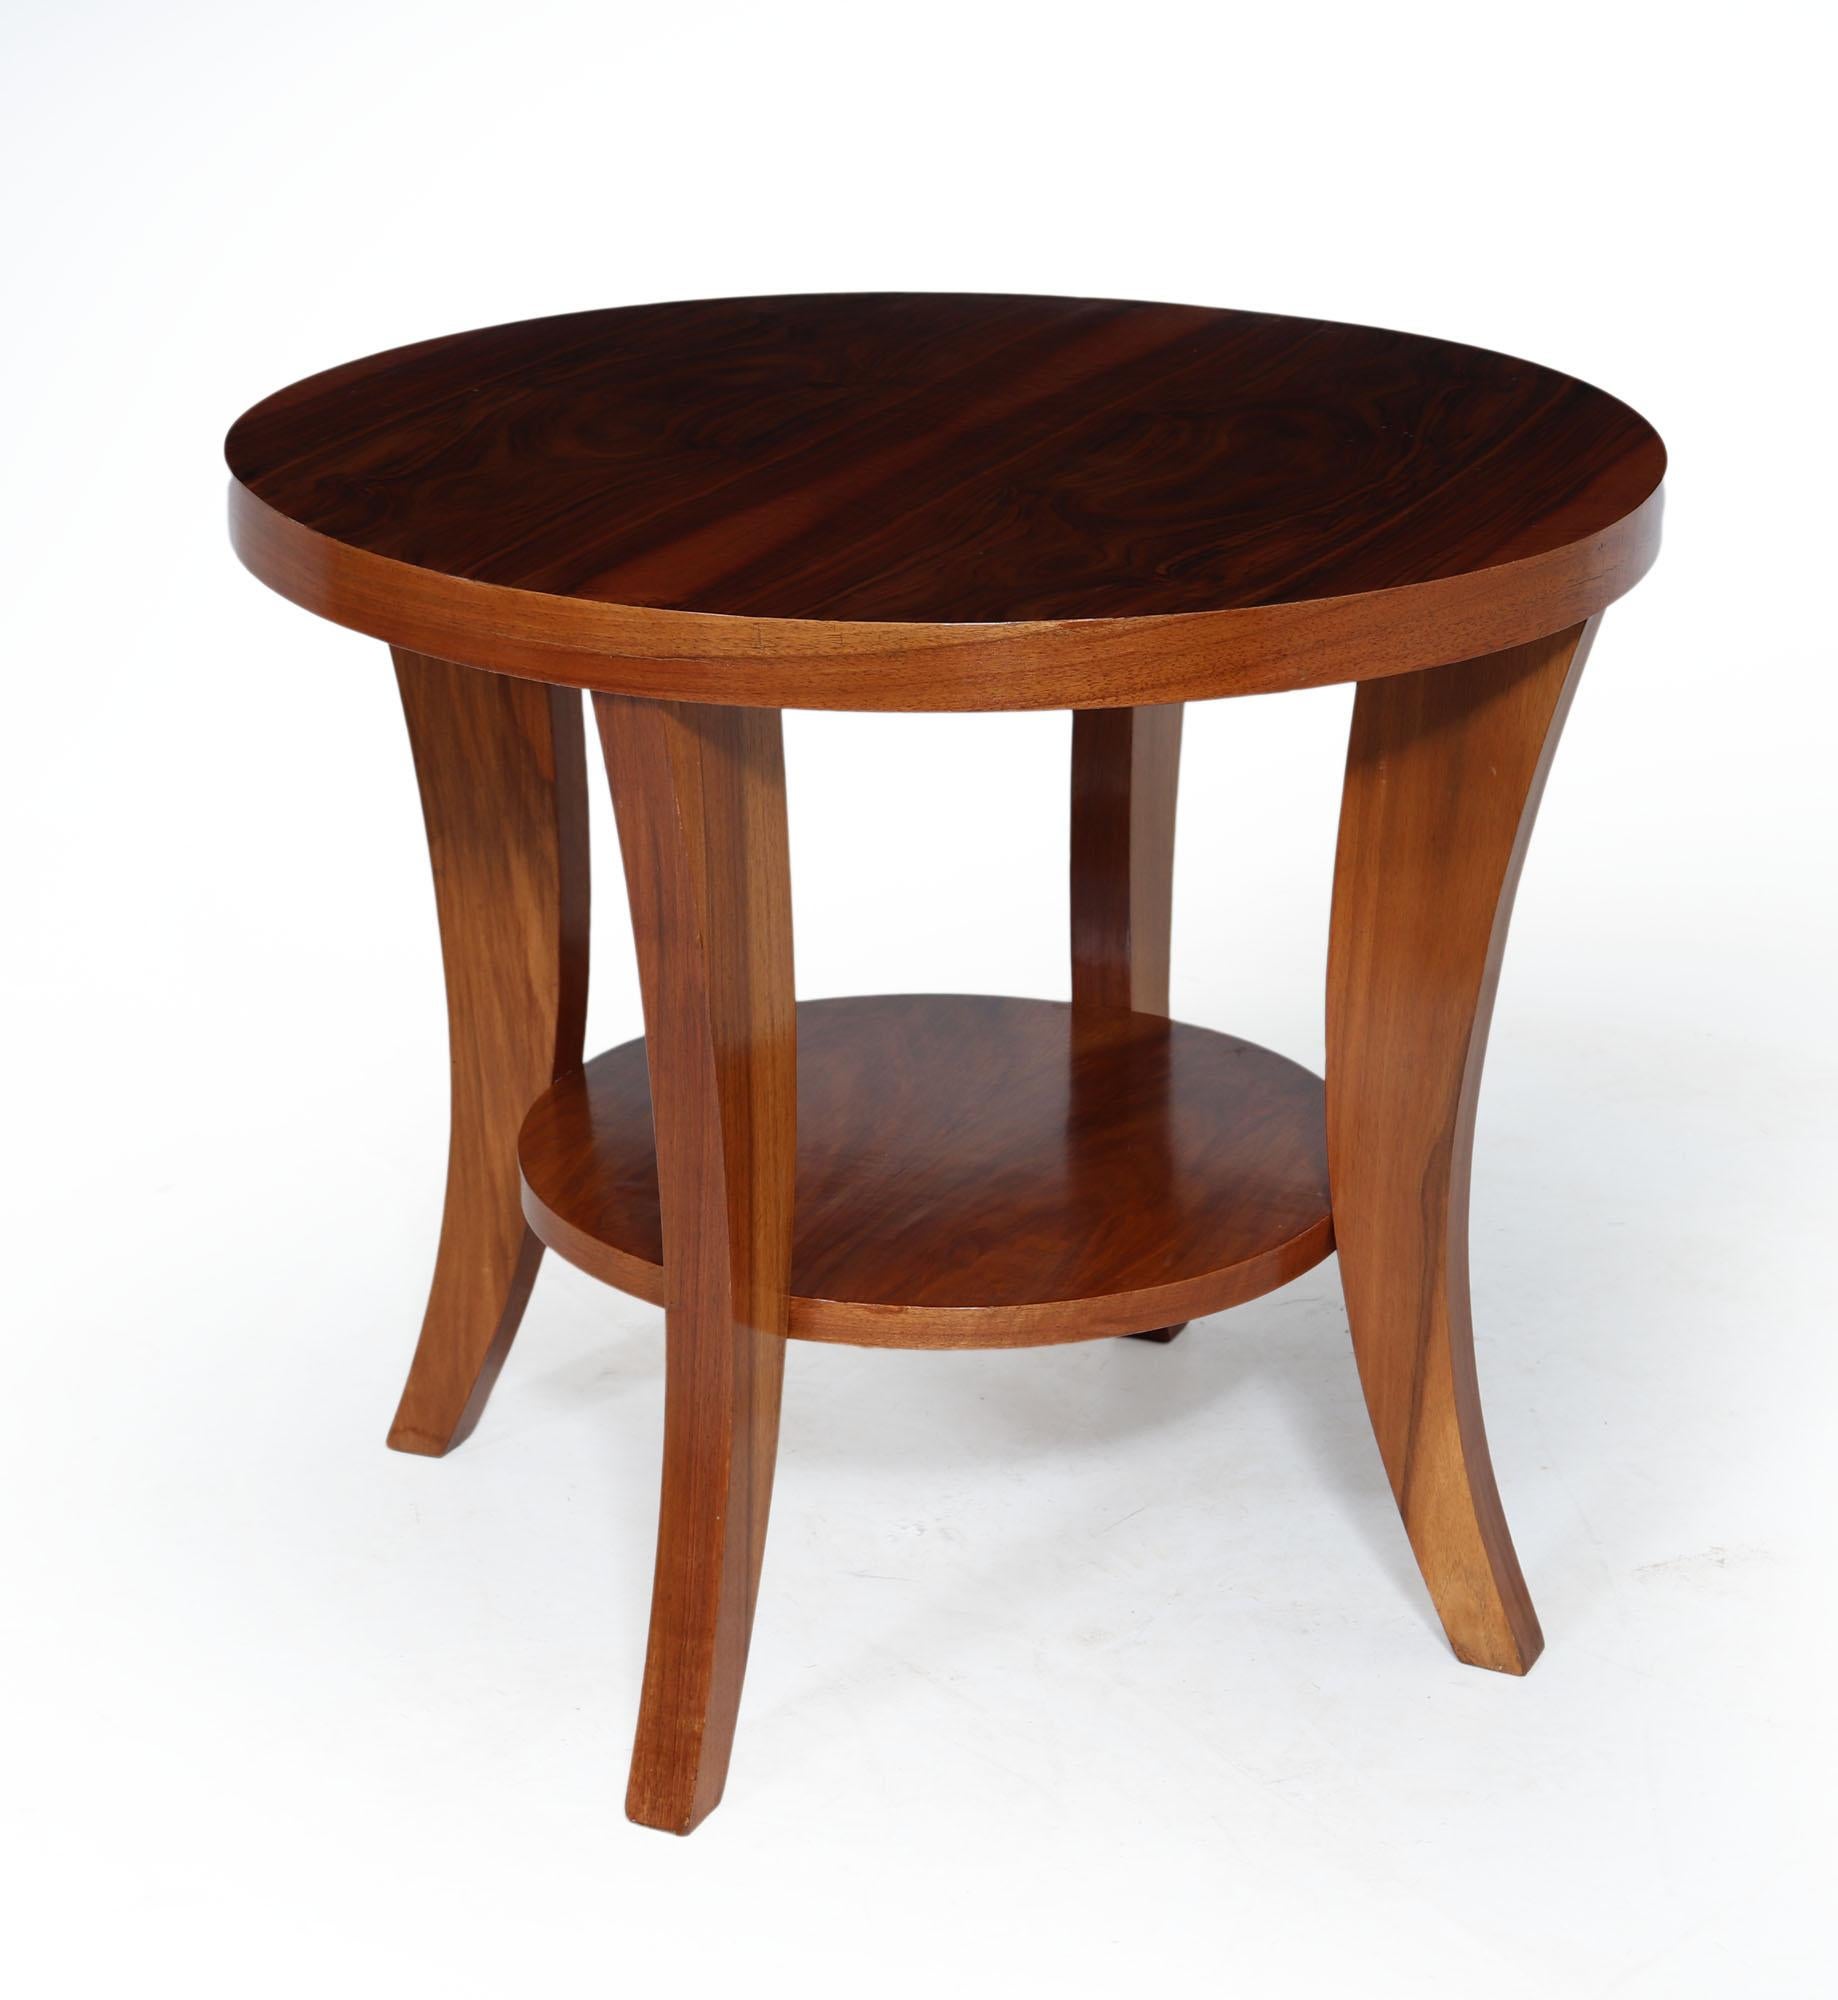 ART DECO COFFEE TABLE
A circular figured walnut centre coffee table, produced in France in the 1930’s, the table has four sabre legs with centre lower tier shelf, the table has been full restored and polished and is in excellent condition